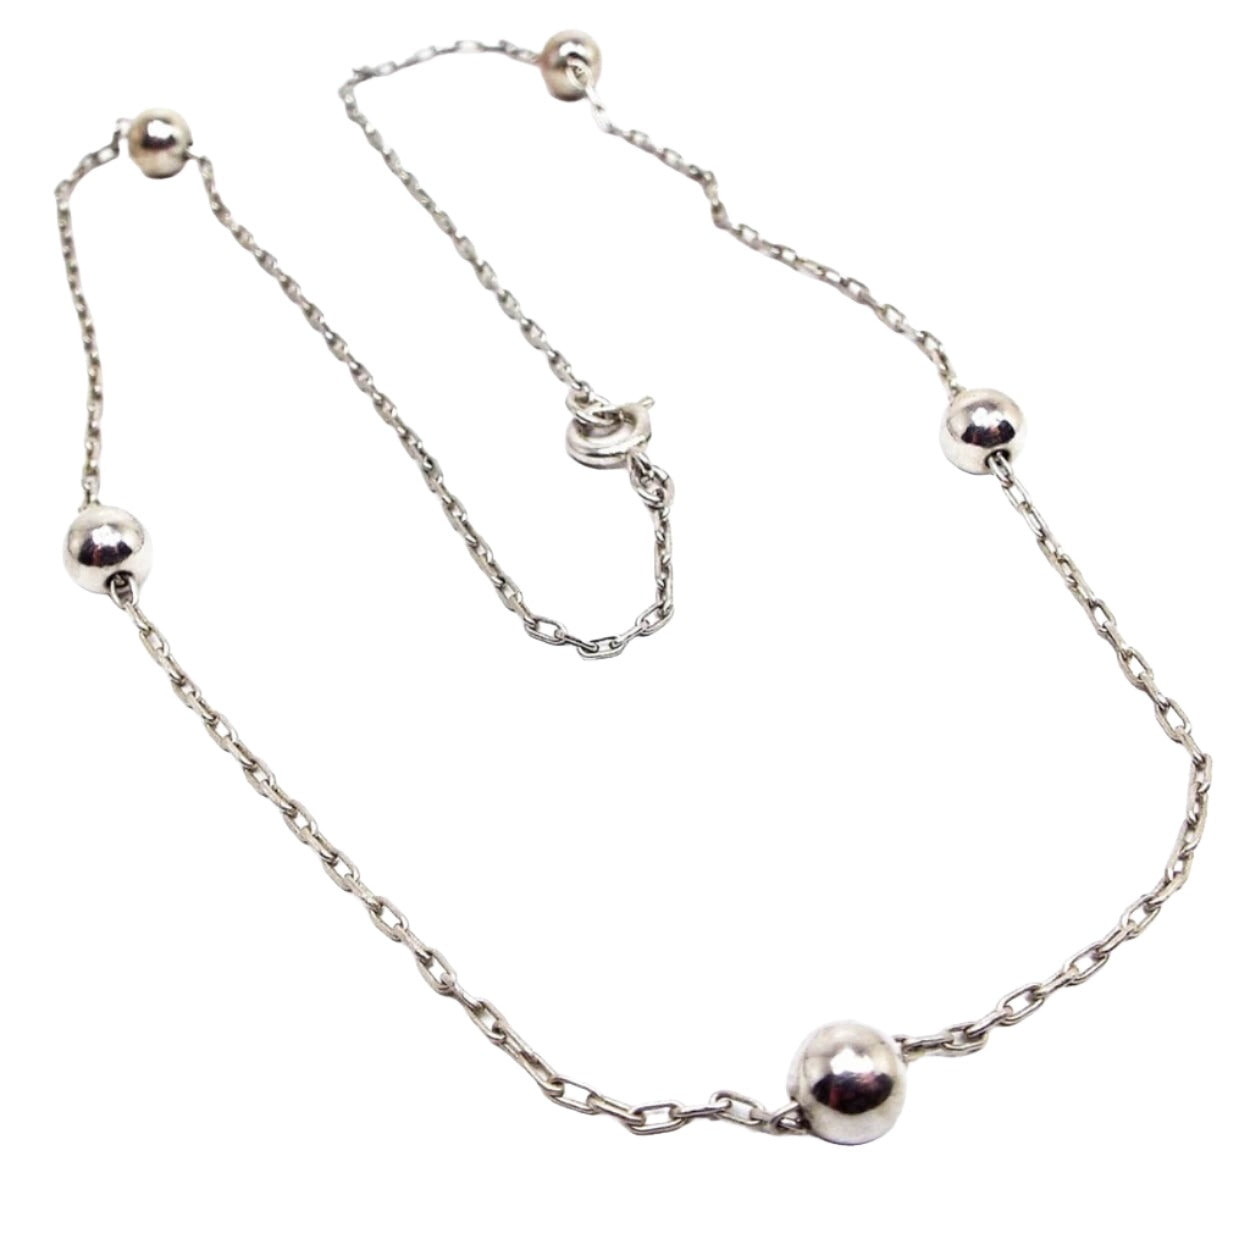 Retro vintage metal beaded chain necklace. There is a thin cable chain in silver tone color with small round metal beads here and there. Necklace has a spring ring clasp.